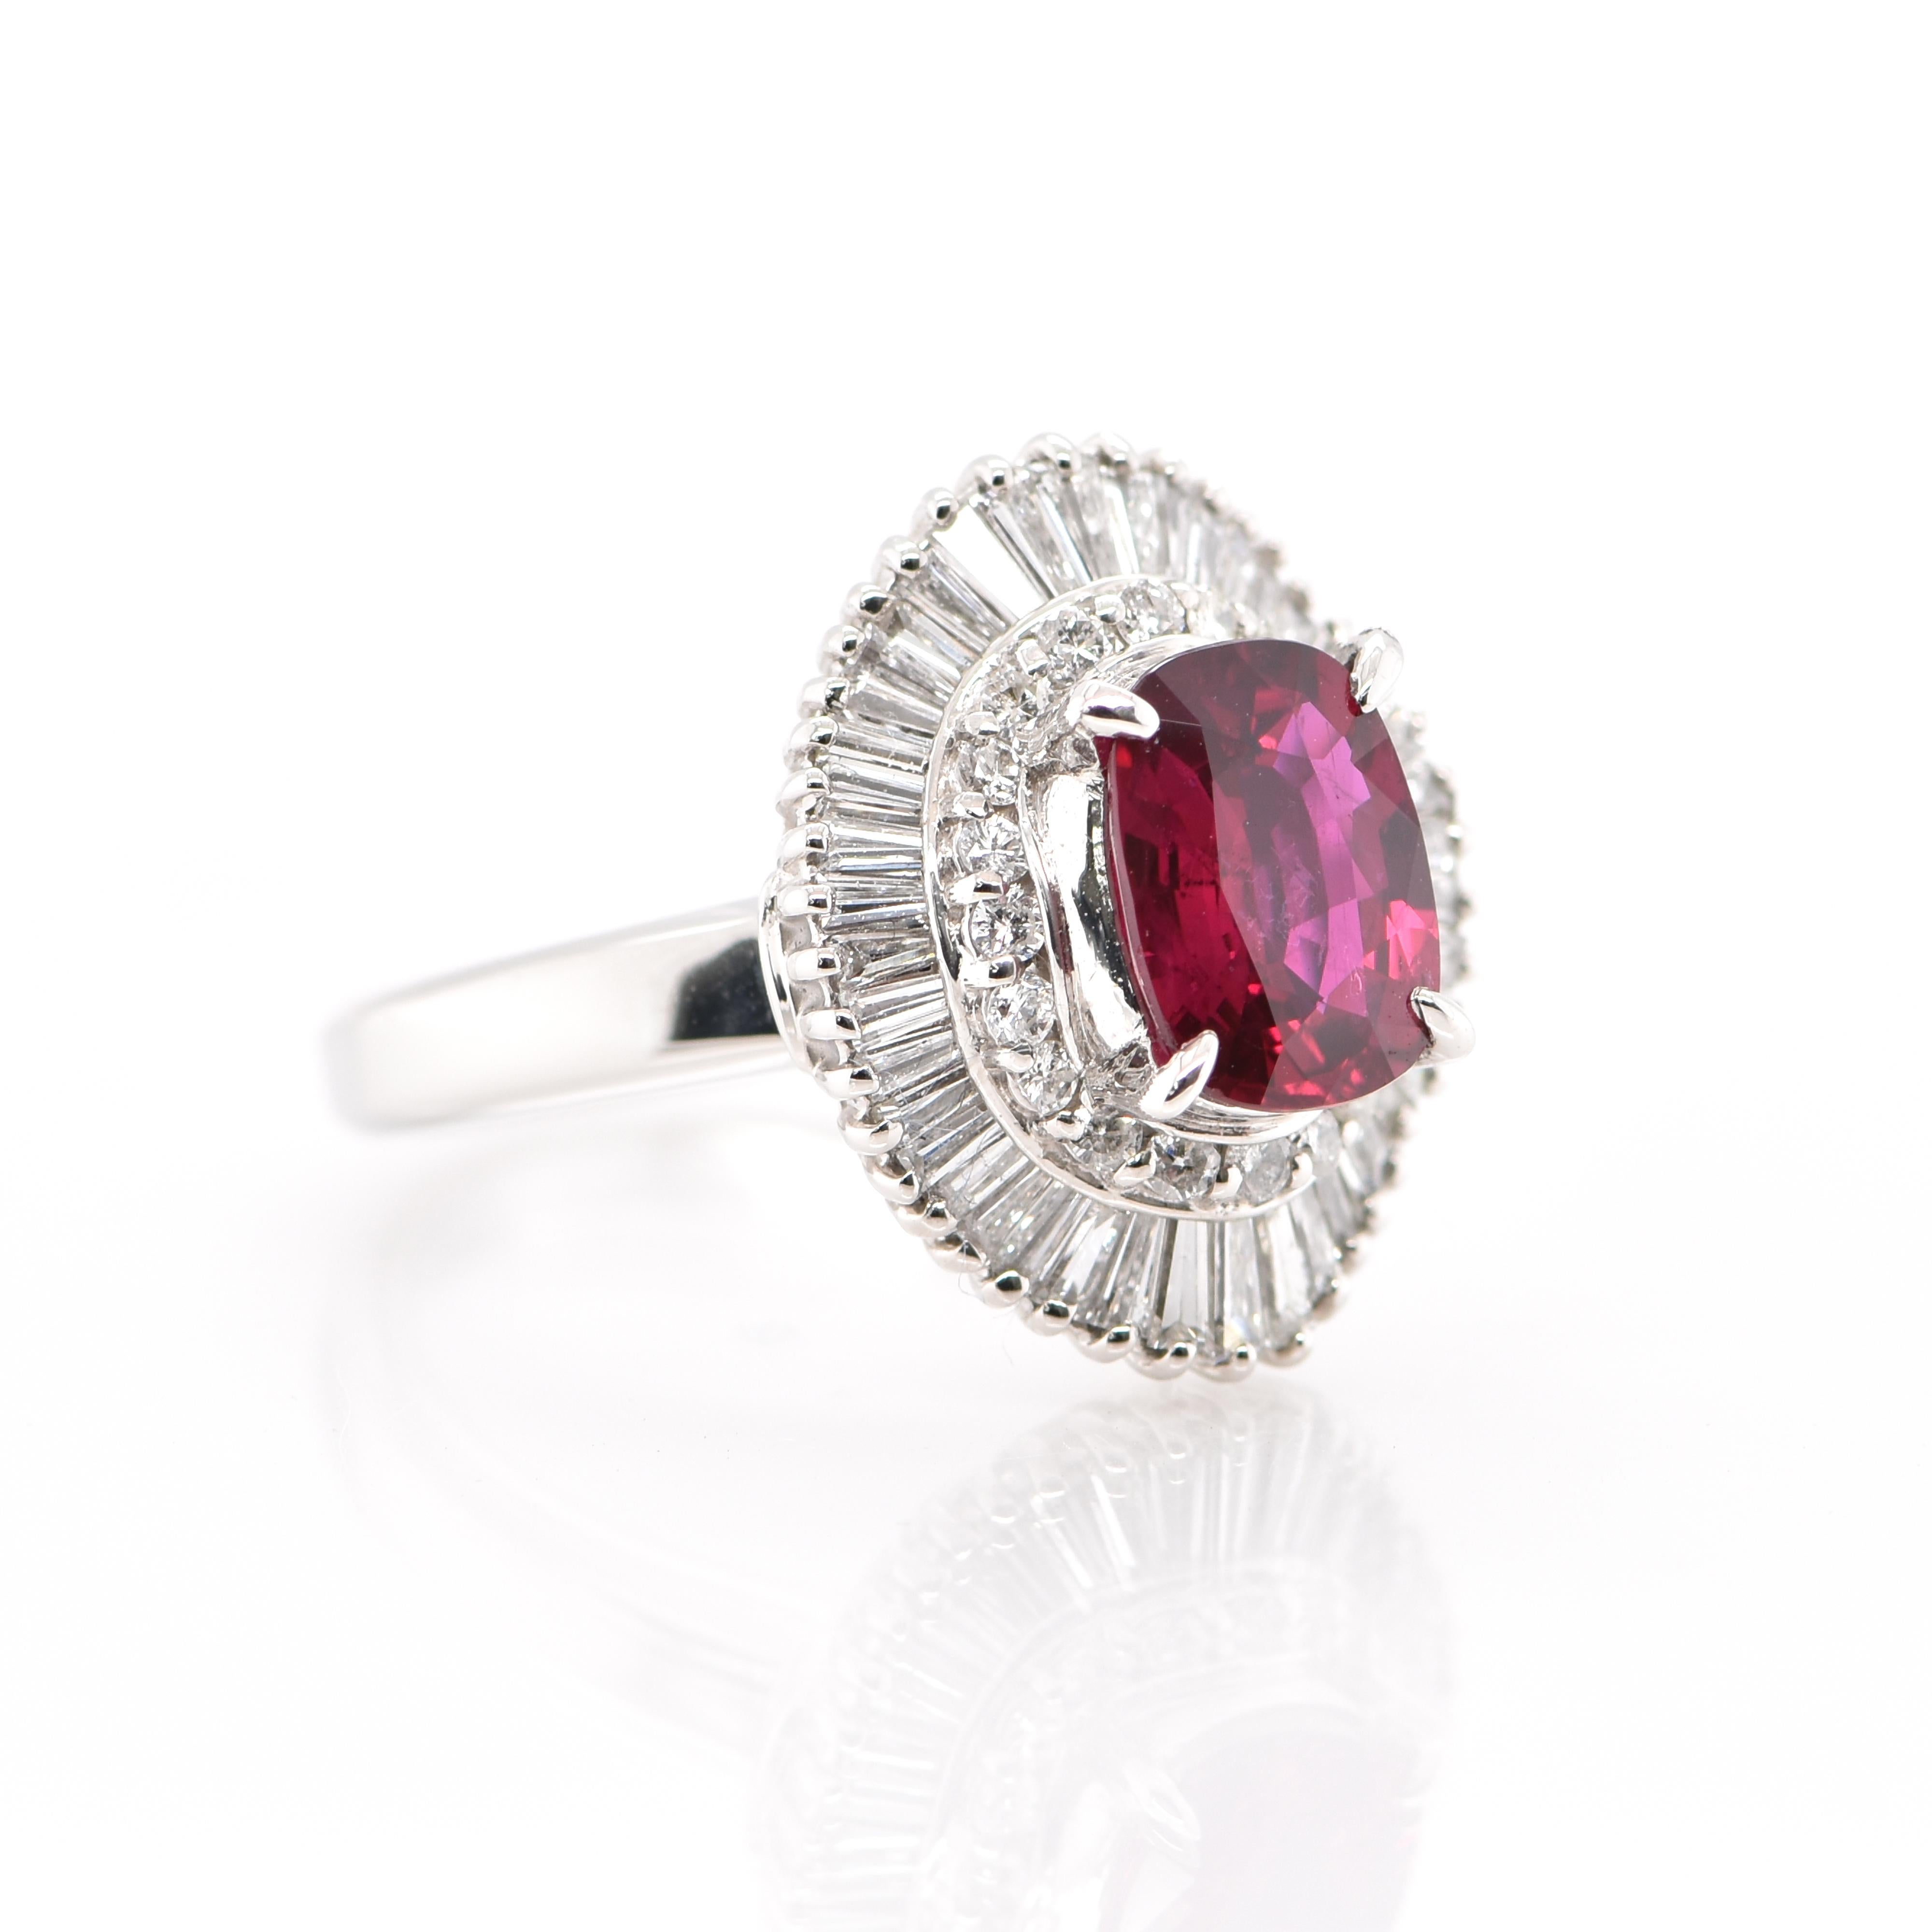 A beautiful Ballerina Ring featuring a GIA Certified 2.15 Carat Natural, Thailand, Heated Ruby and 0.96 Carat of Diamond Accents set in Platinum. Rubies are referred to as 